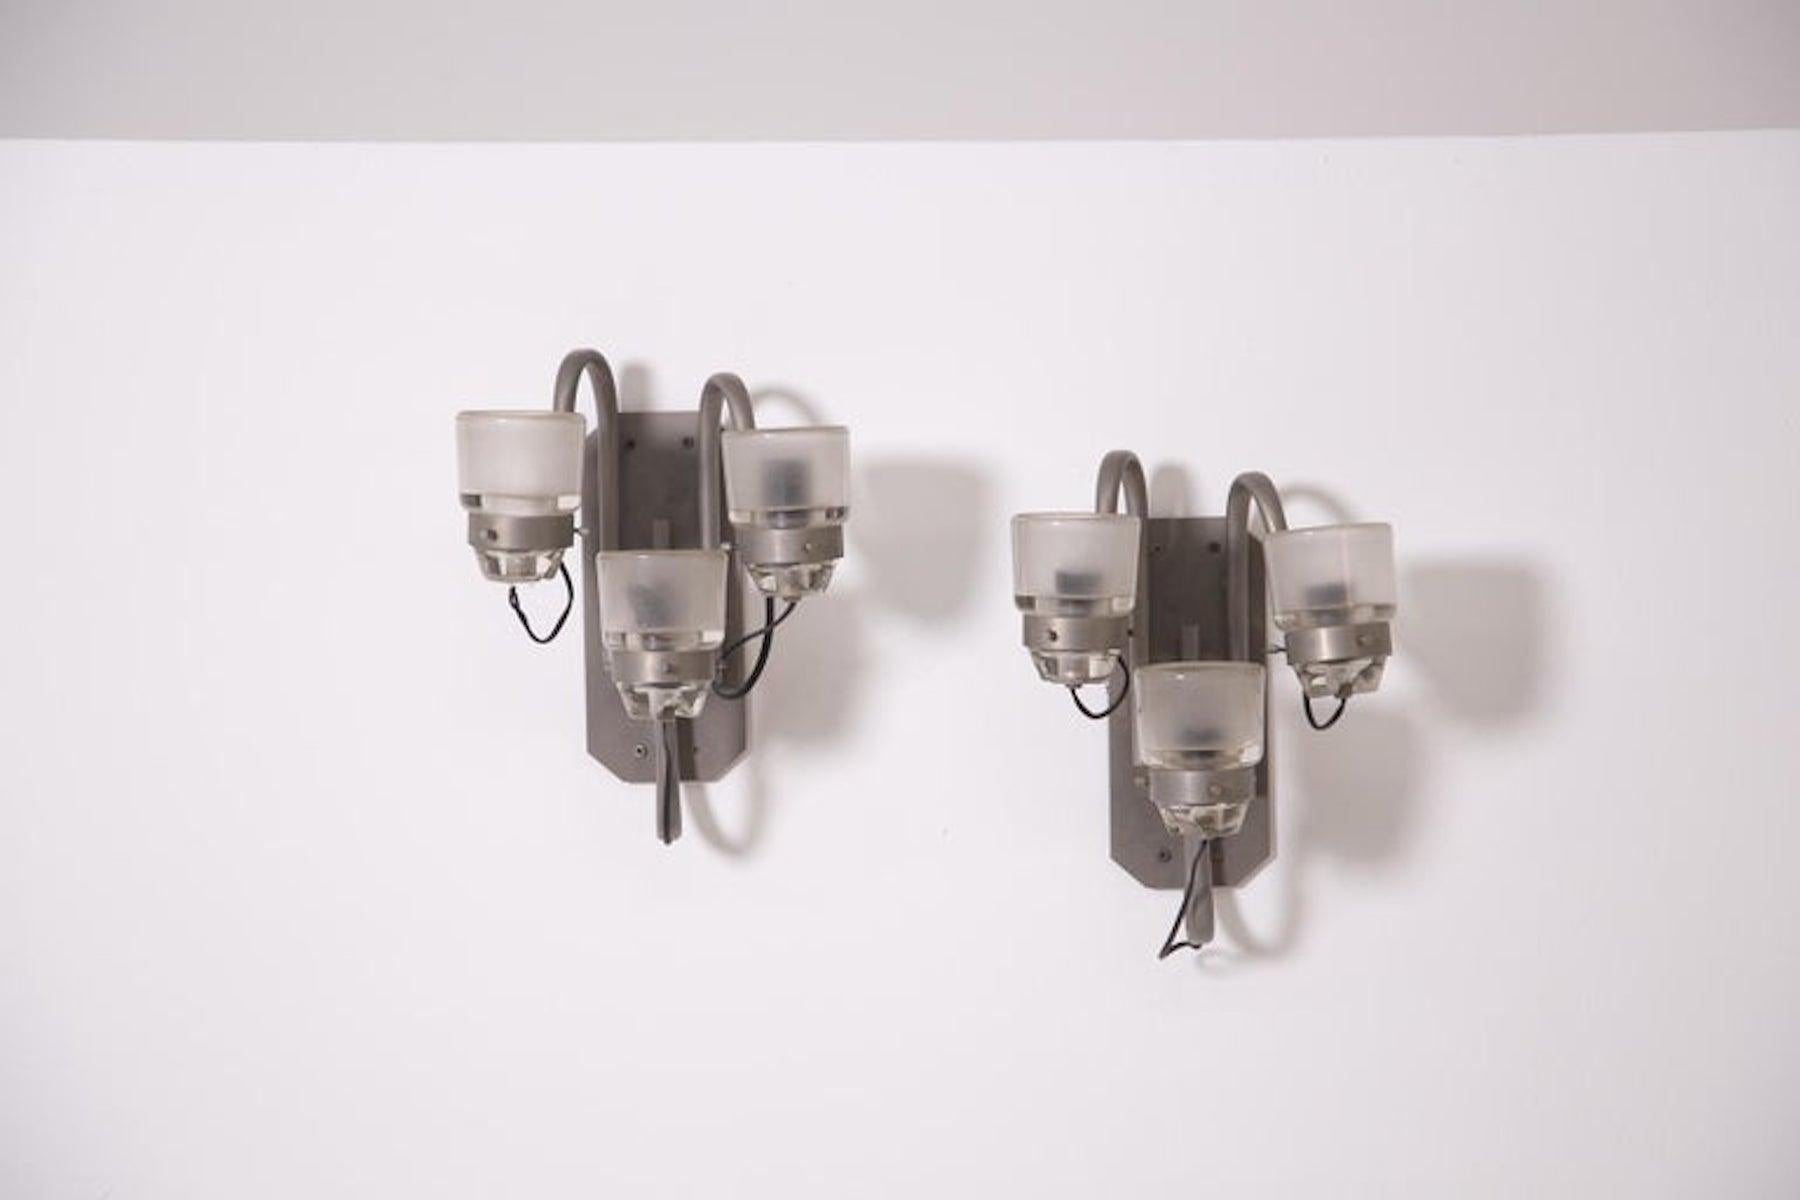 Modern Italian wall lamps designed attr. to Joe Colombo for the OLuce factory.
Each wall lamp has three lights. Its structure is in nickel-plated brass with three arms. At the end of each arm we find its lamp holder in iridescent and frosted glass